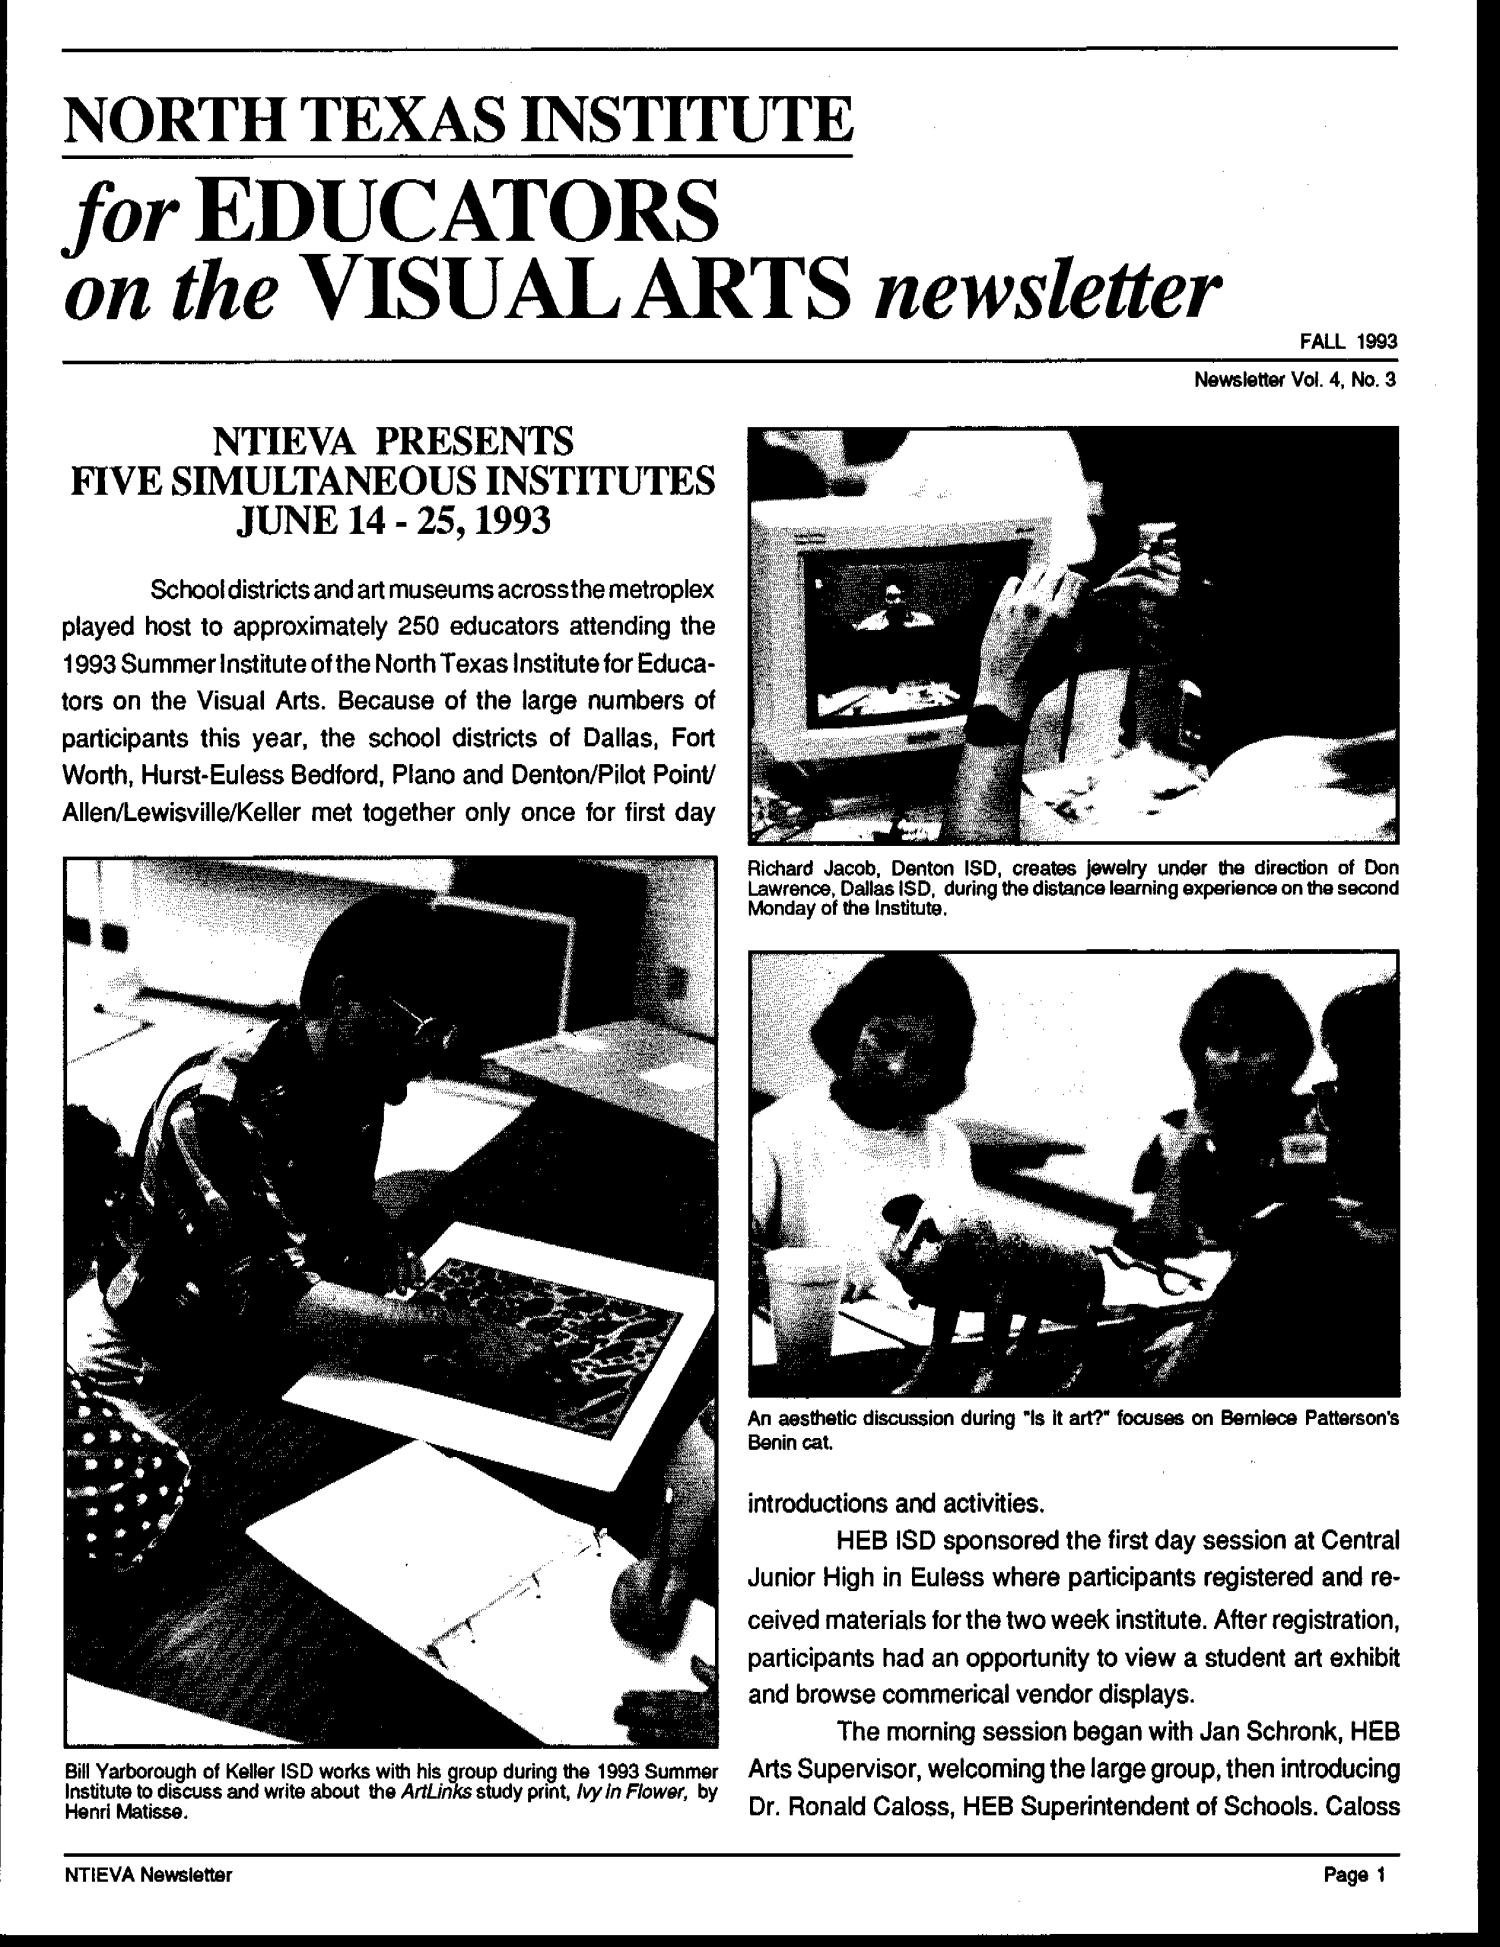 North Texas Institute for Educators on the Visual Arts newsletter, vol. 4, no. 3., Fall 1993
                                                
                                                    [Sequence #]: 1 of 12
                                                